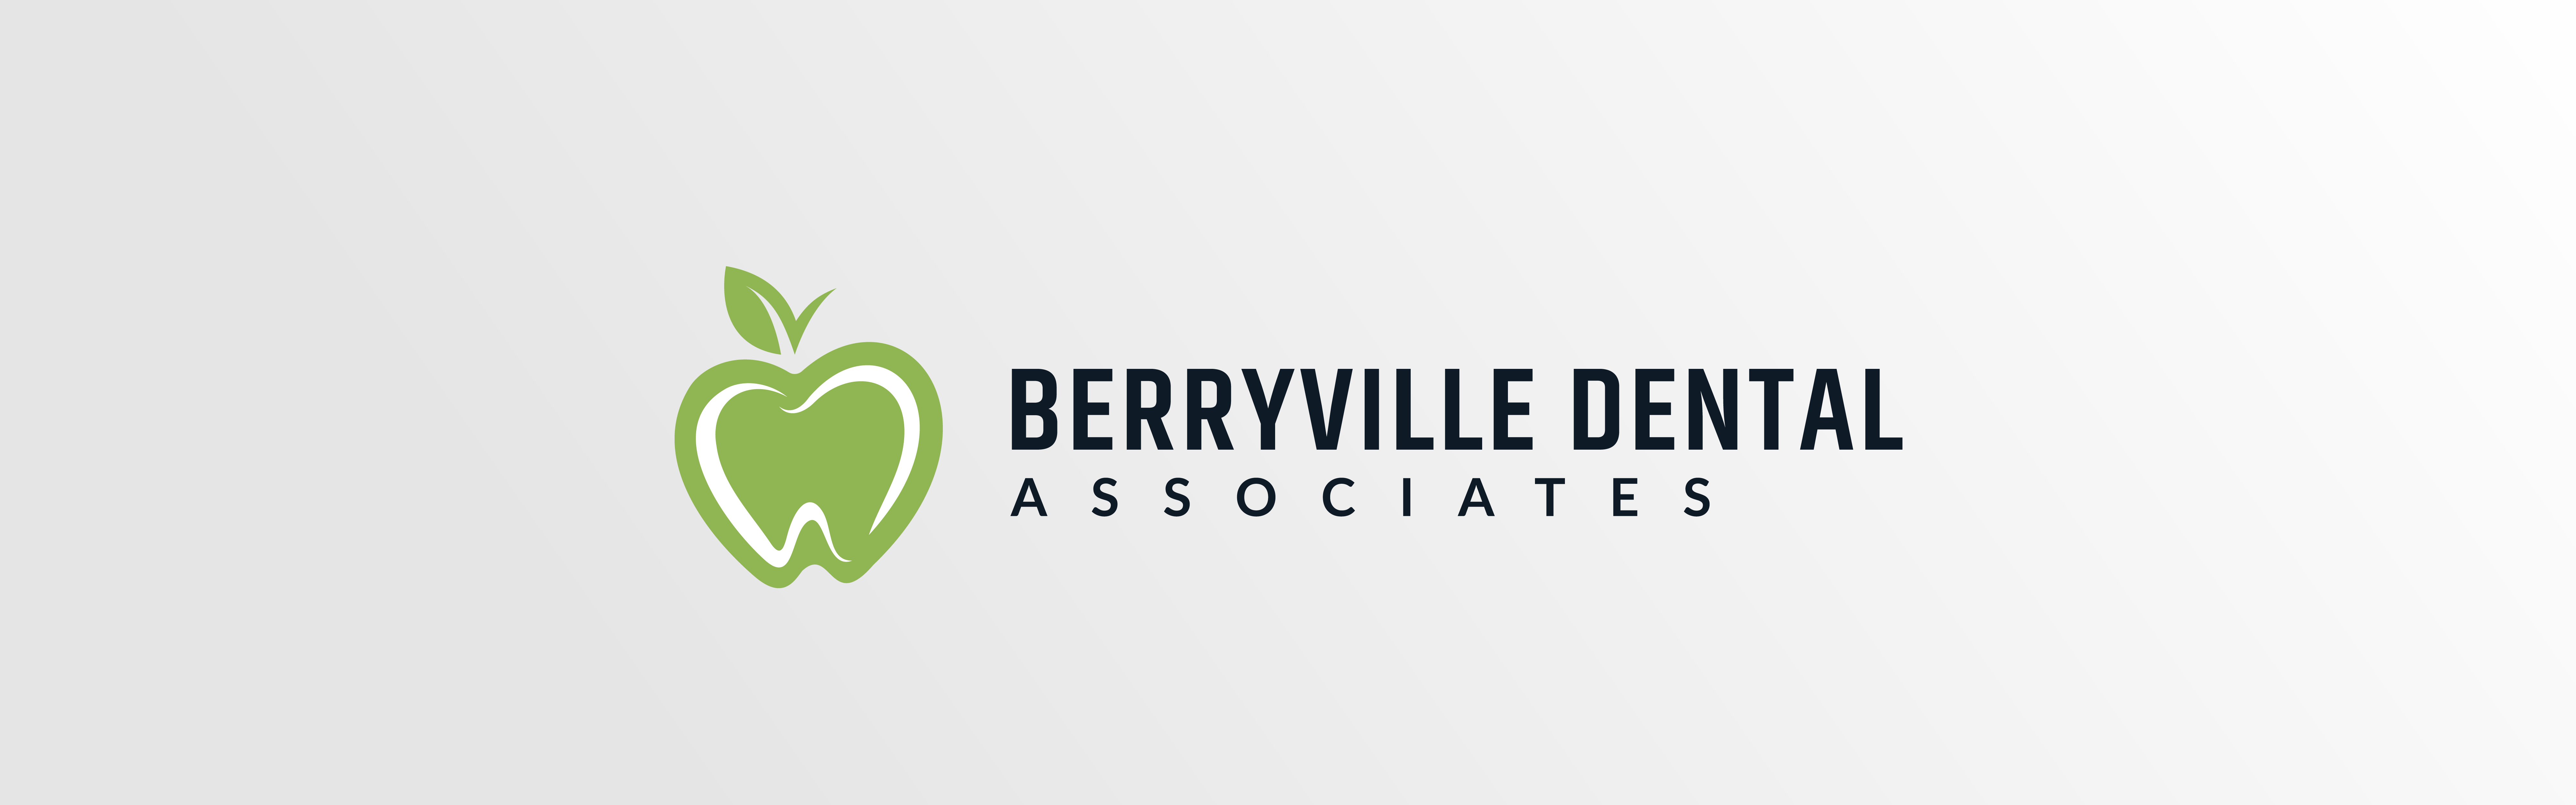 Logo of Berryville Dental Associates featuring a stylized apple with a leaf that subtly incorporates a dental tool, accompanied by the practice name in a sleek, modern font.